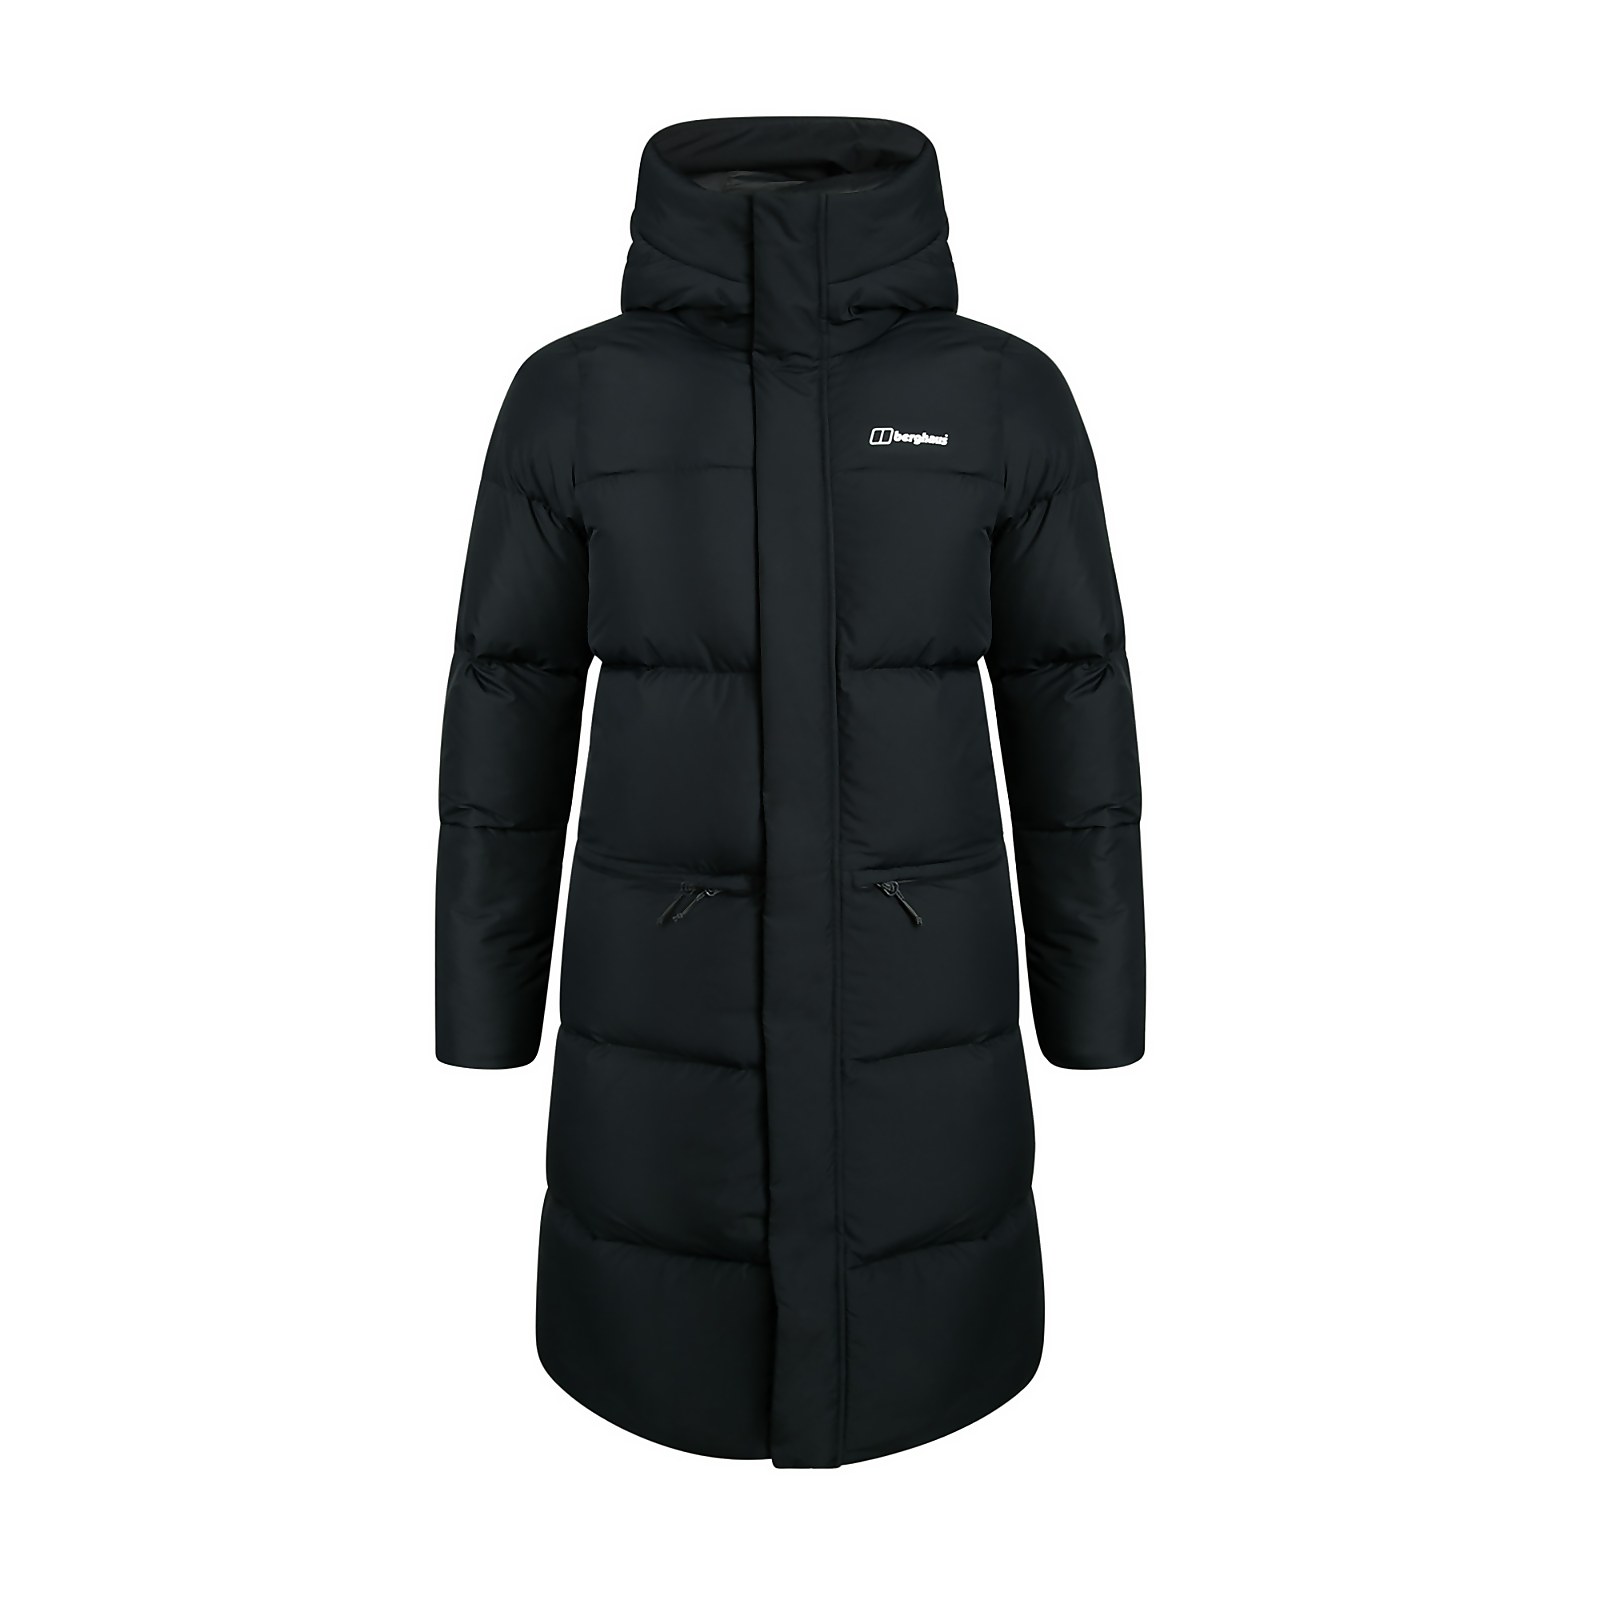 Berghaus Womens Combust Reflect Long Down Insulated Jacket - Black - 16